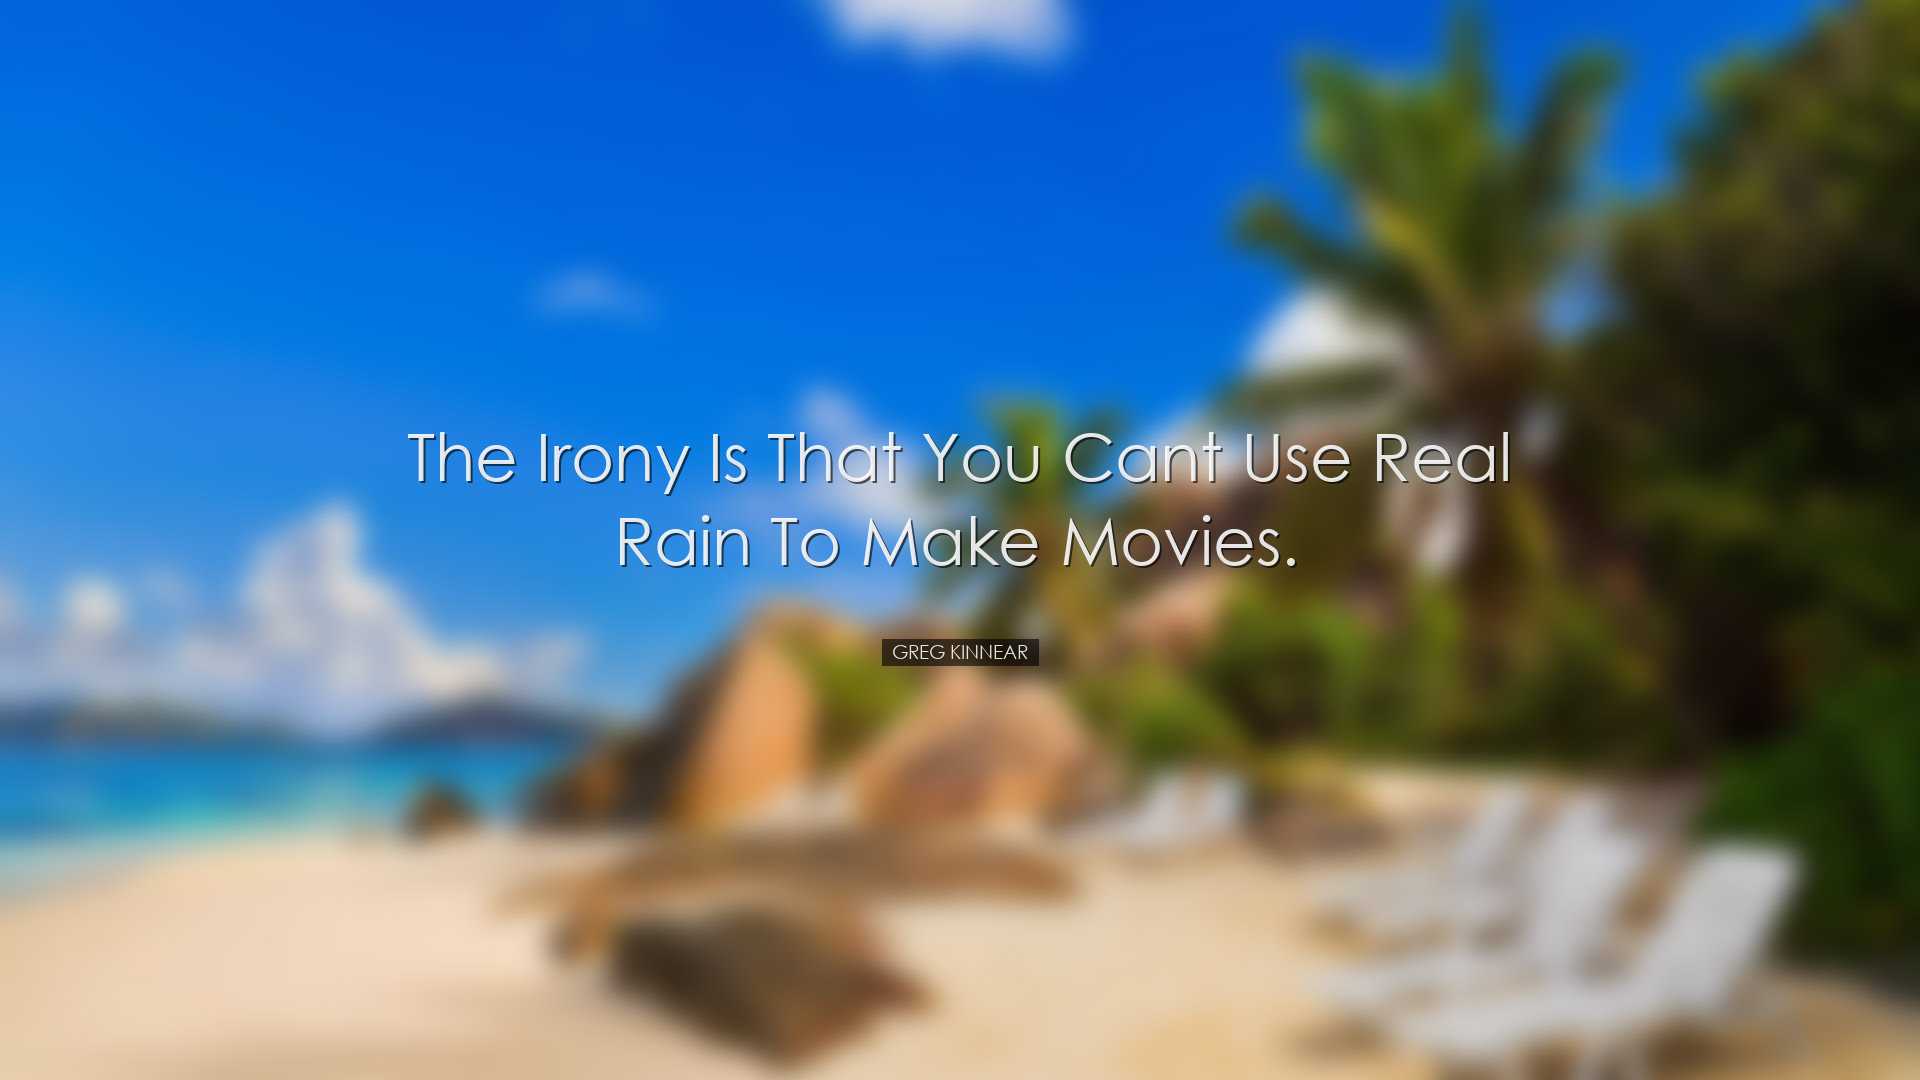 The irony is that you cant use real rain to make movies. - Greg Ki